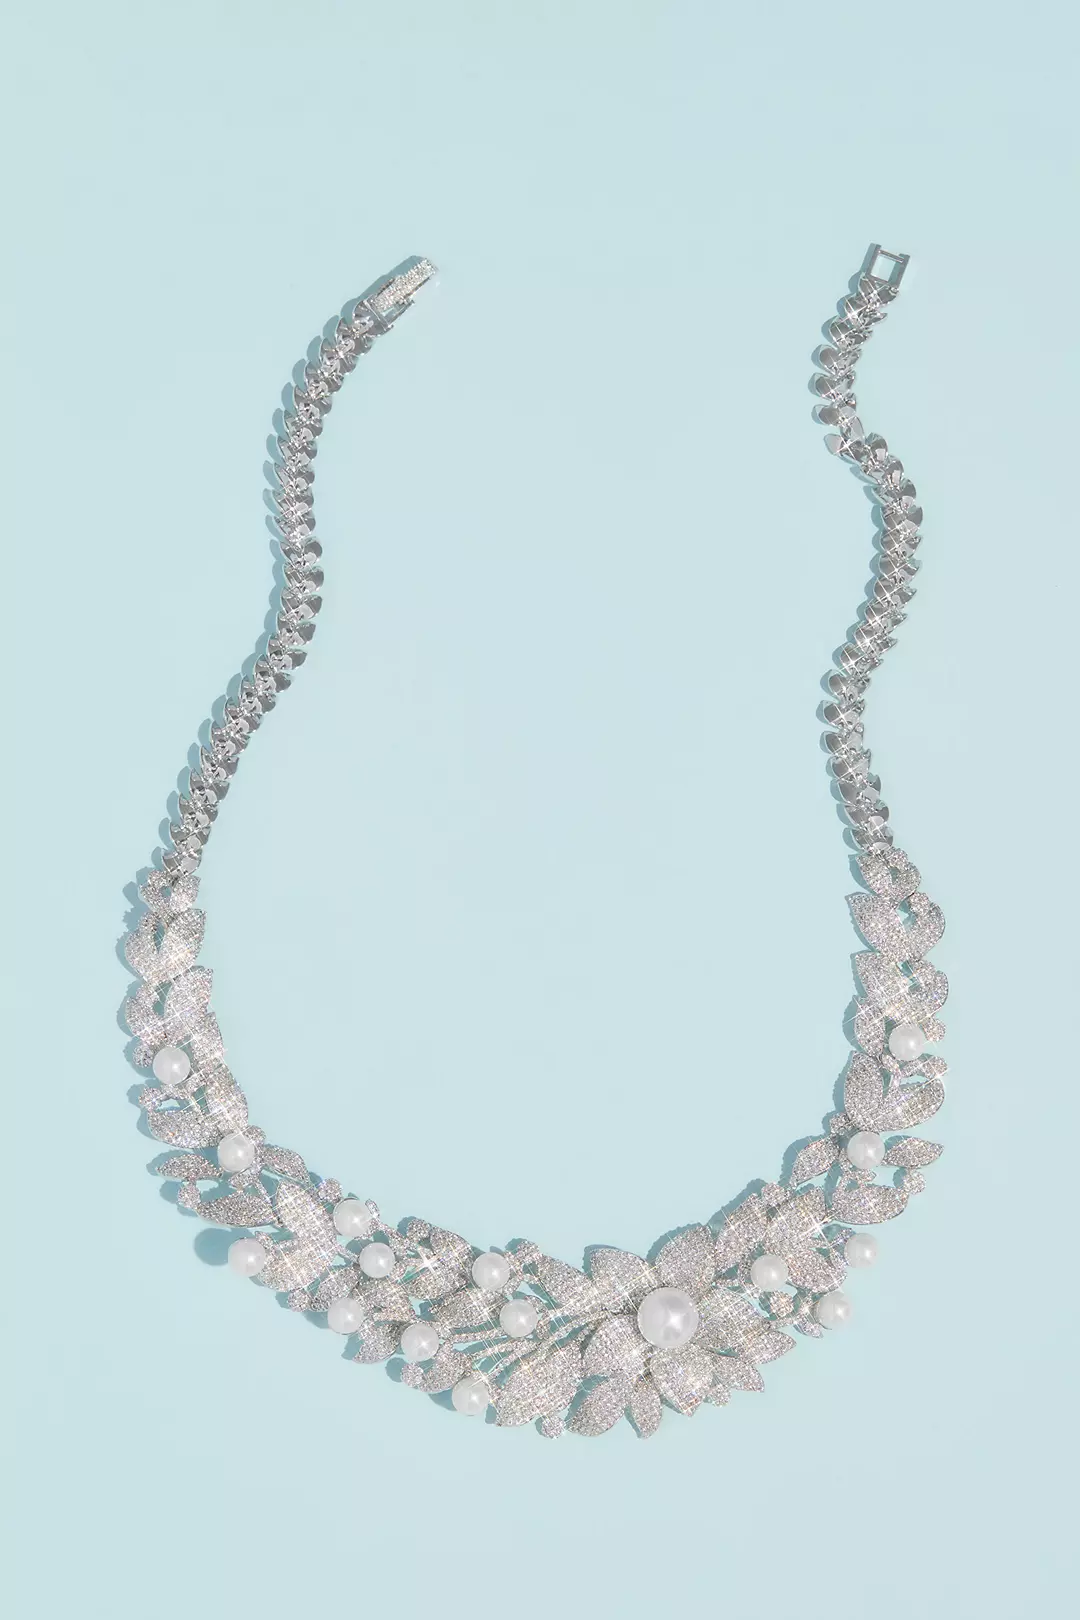 Crystal Floral Necklace with Pearl Embellishments Image